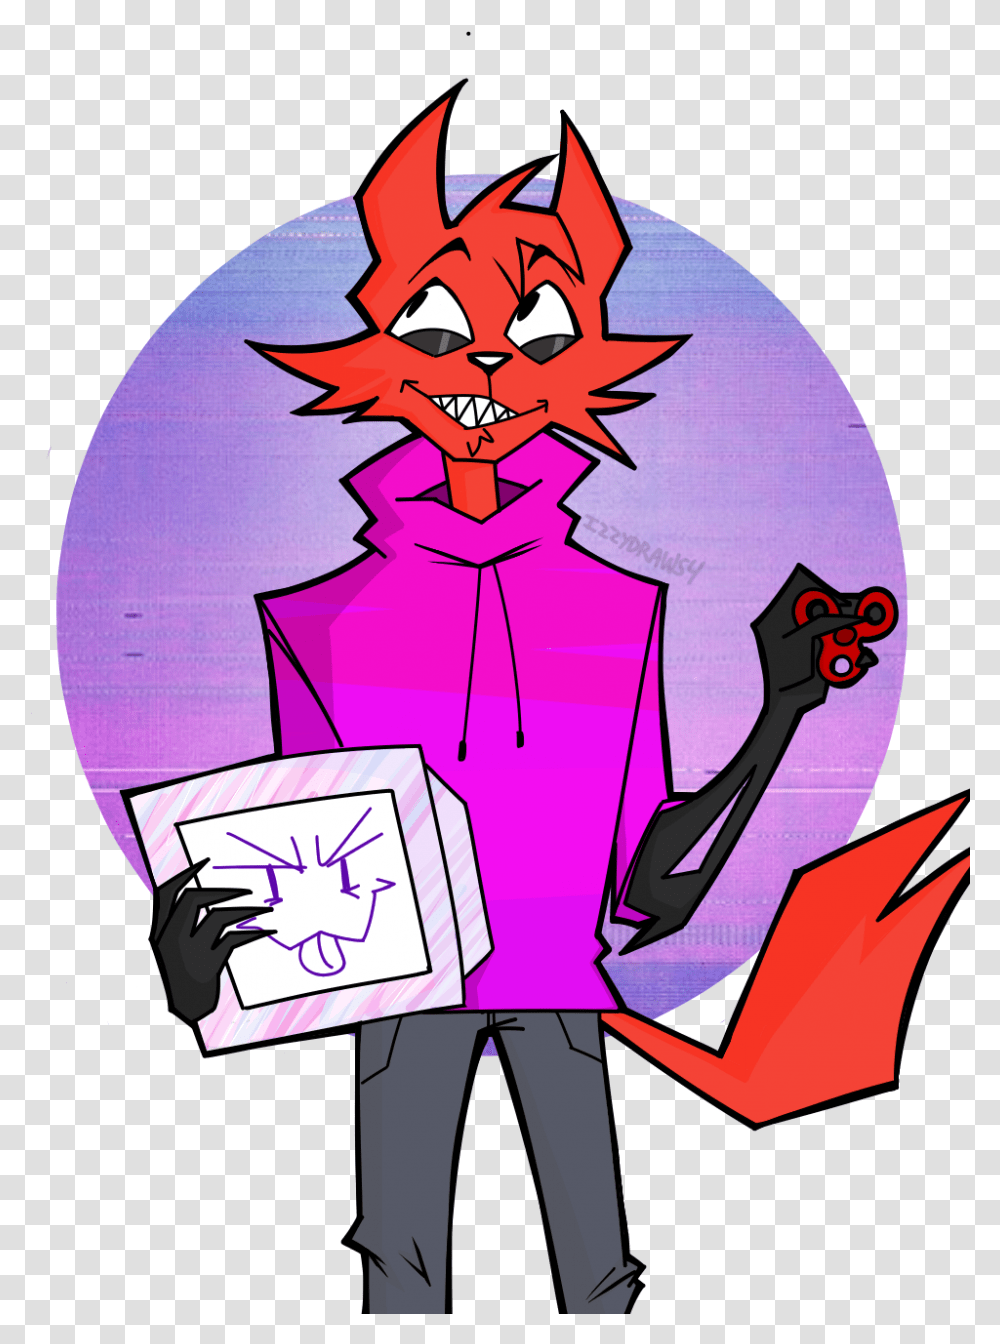 Pyrocynical Oh Boi Don't I Love Me Some Furry Click Fictional Character, Graphics, Art, Clothing, Apparel Transparent Png